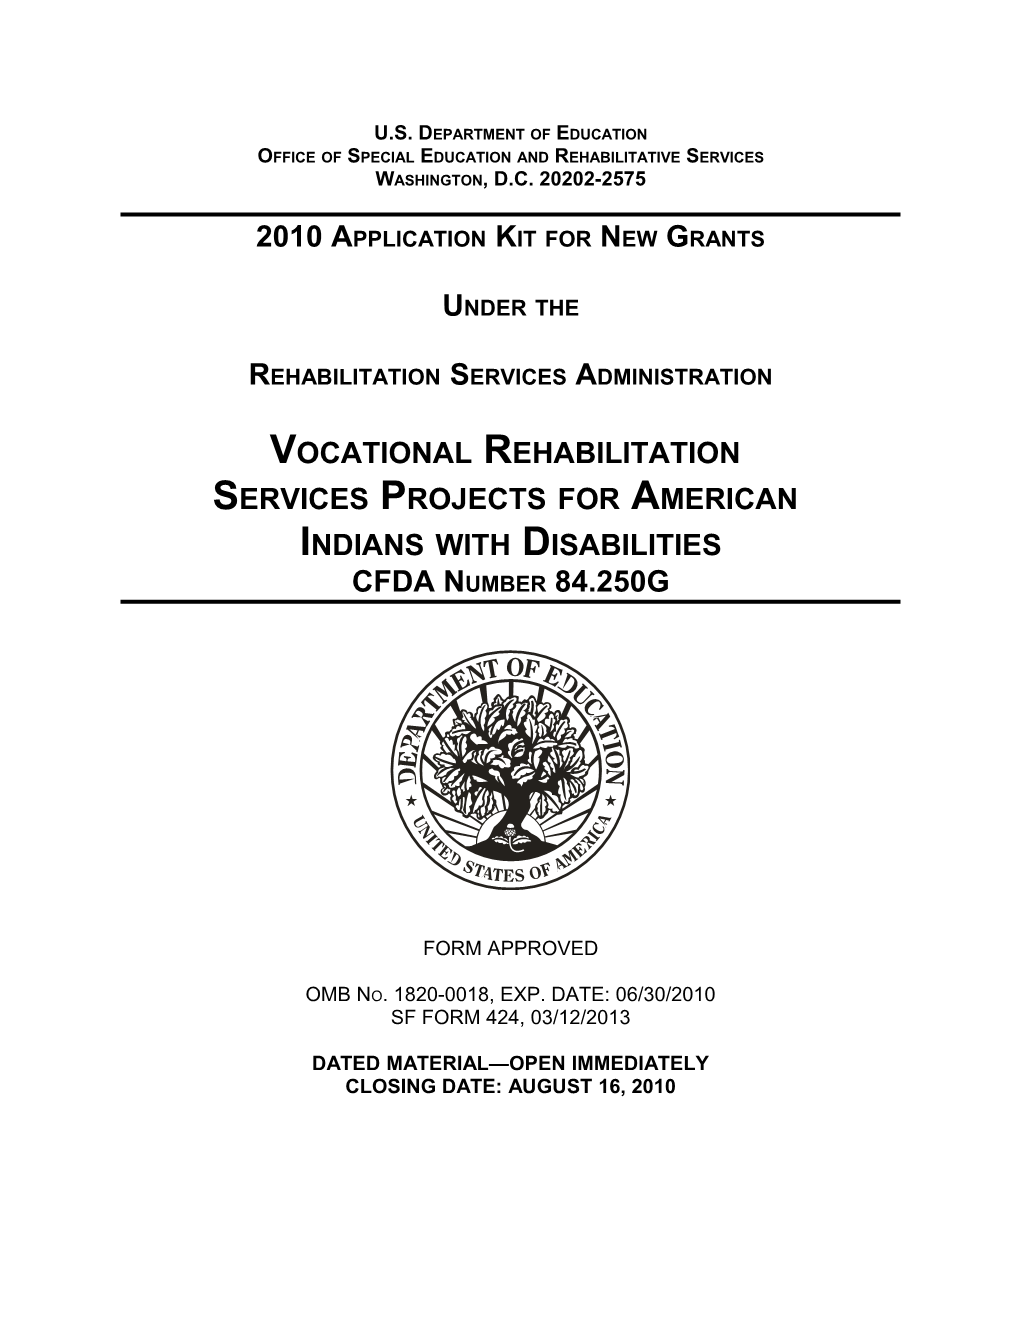 2010 Application Kit for New Grants Under the Rehabilitation Services Administration; Vocational